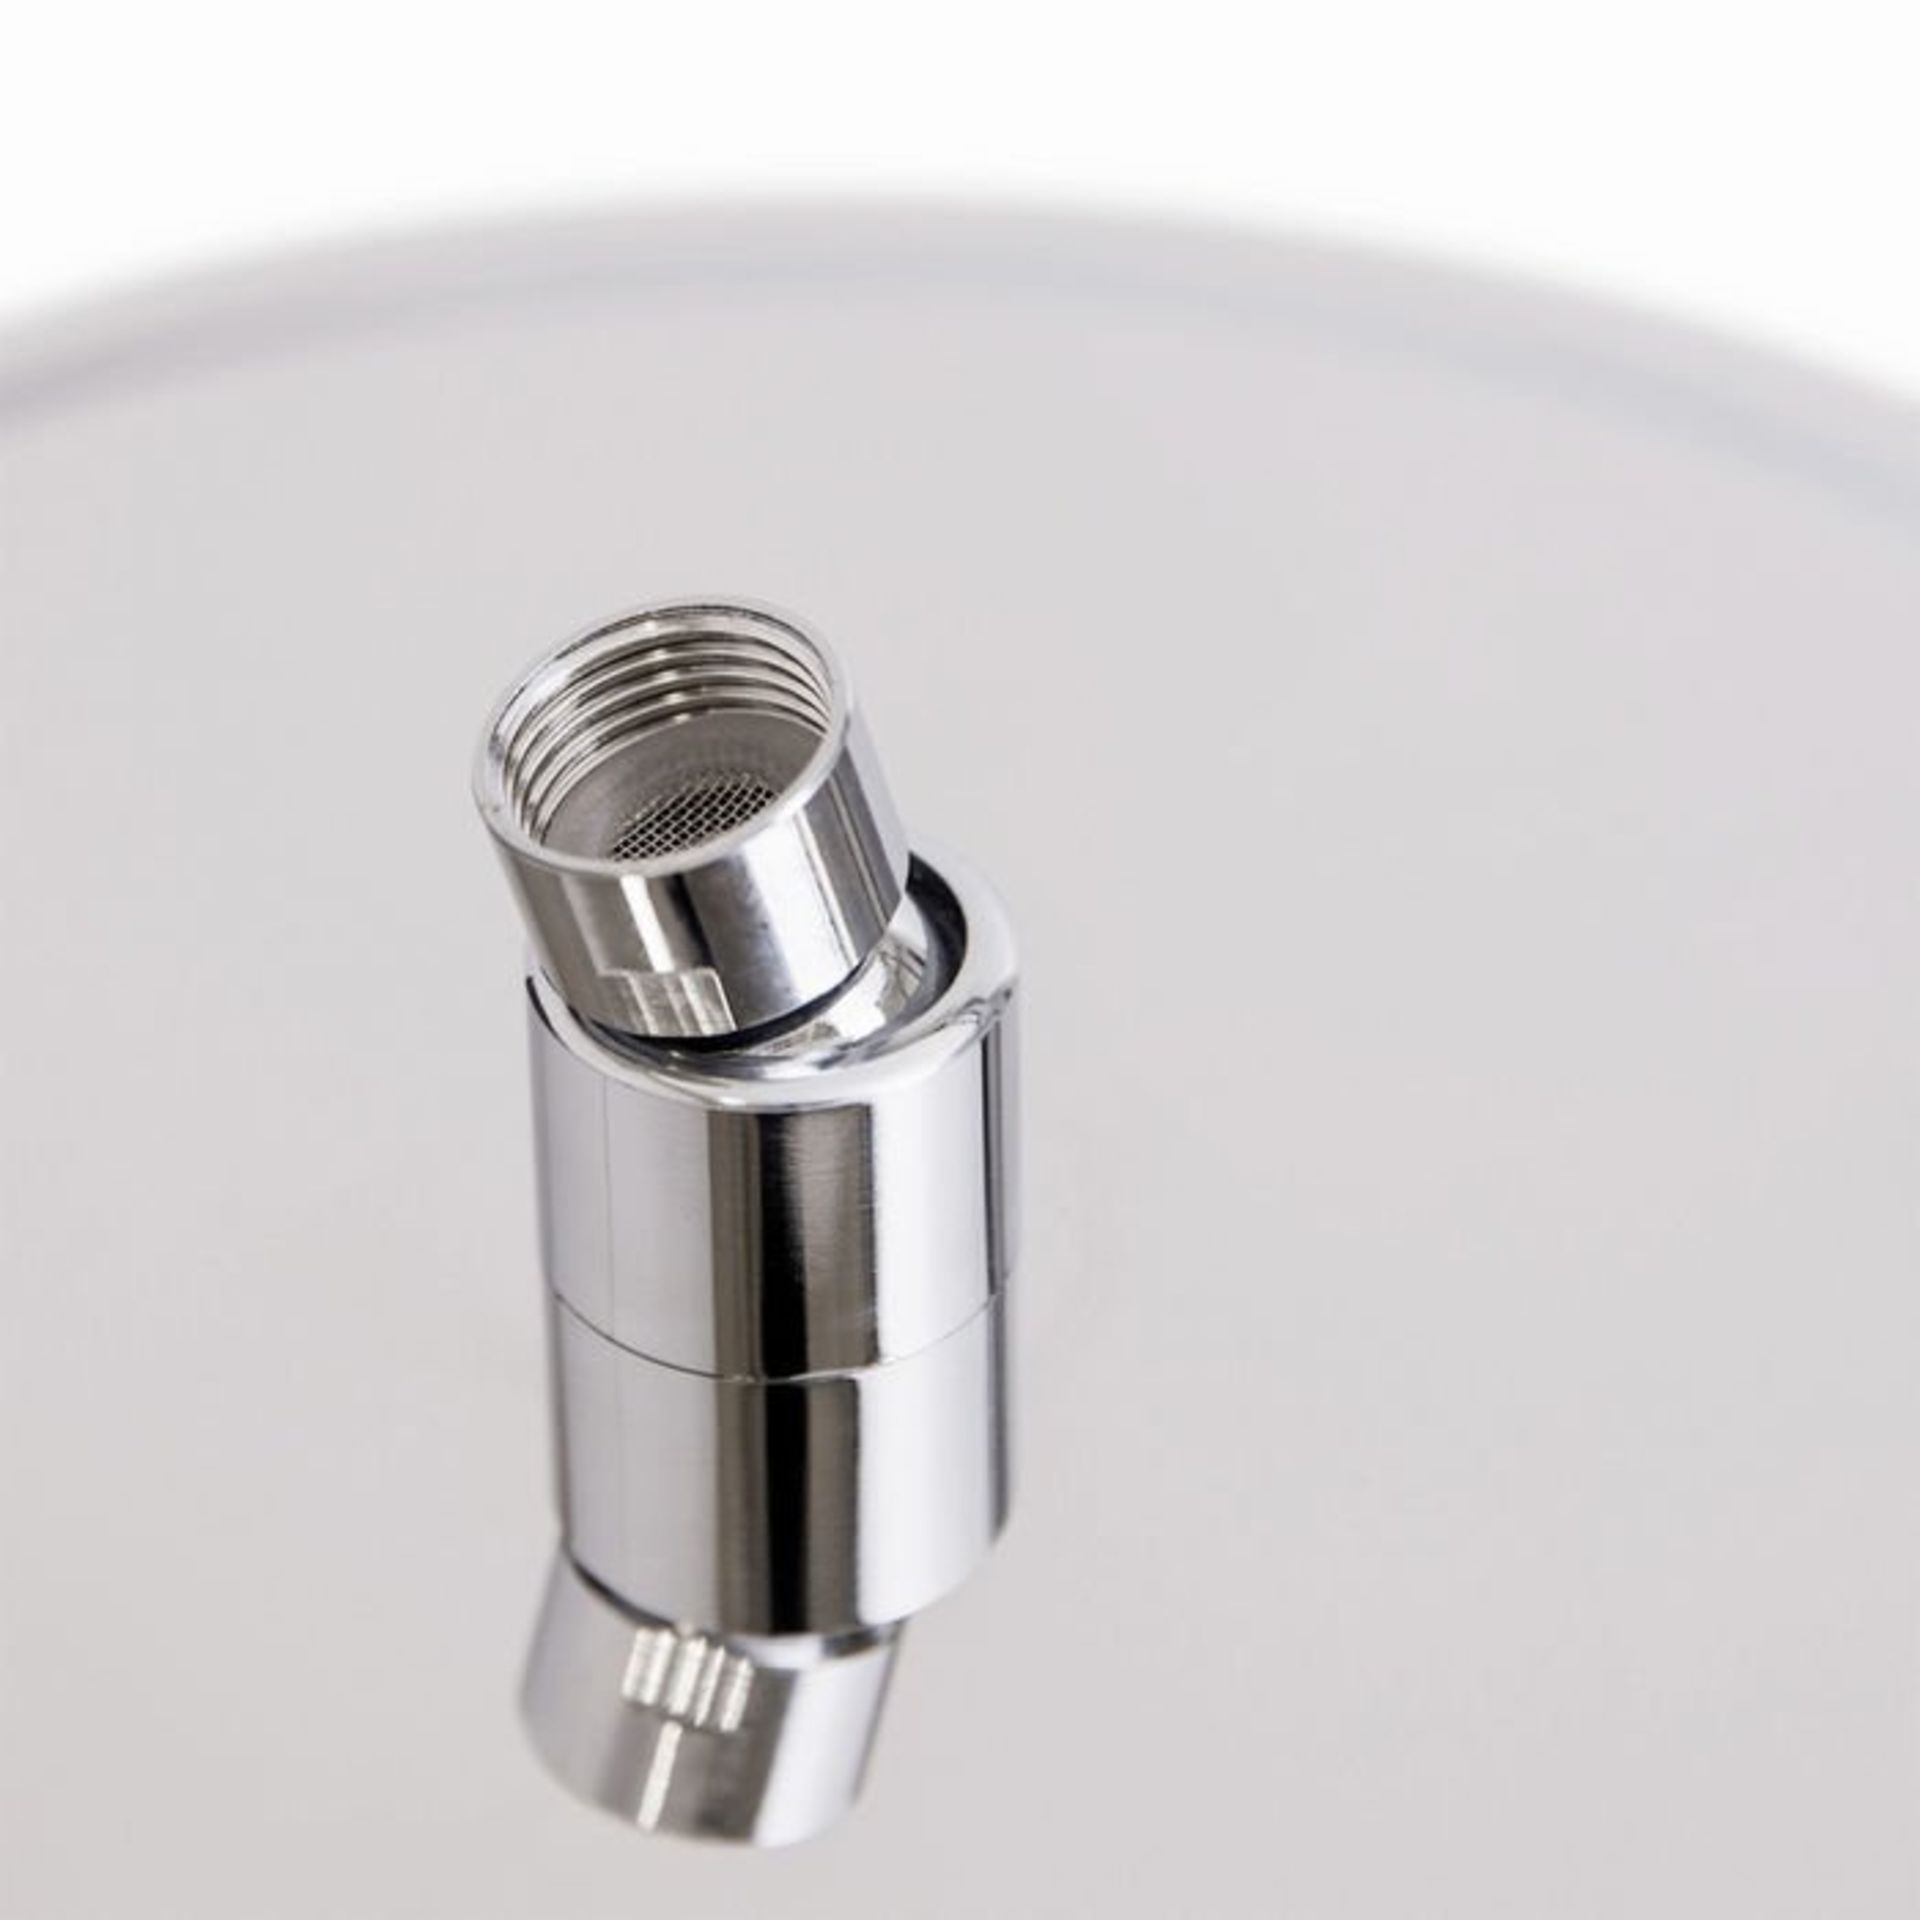 (H35) Round Exposed Thermostatic Mixer Shower Kit & Large Head. Cool to touch shower for - Image 6 of 6